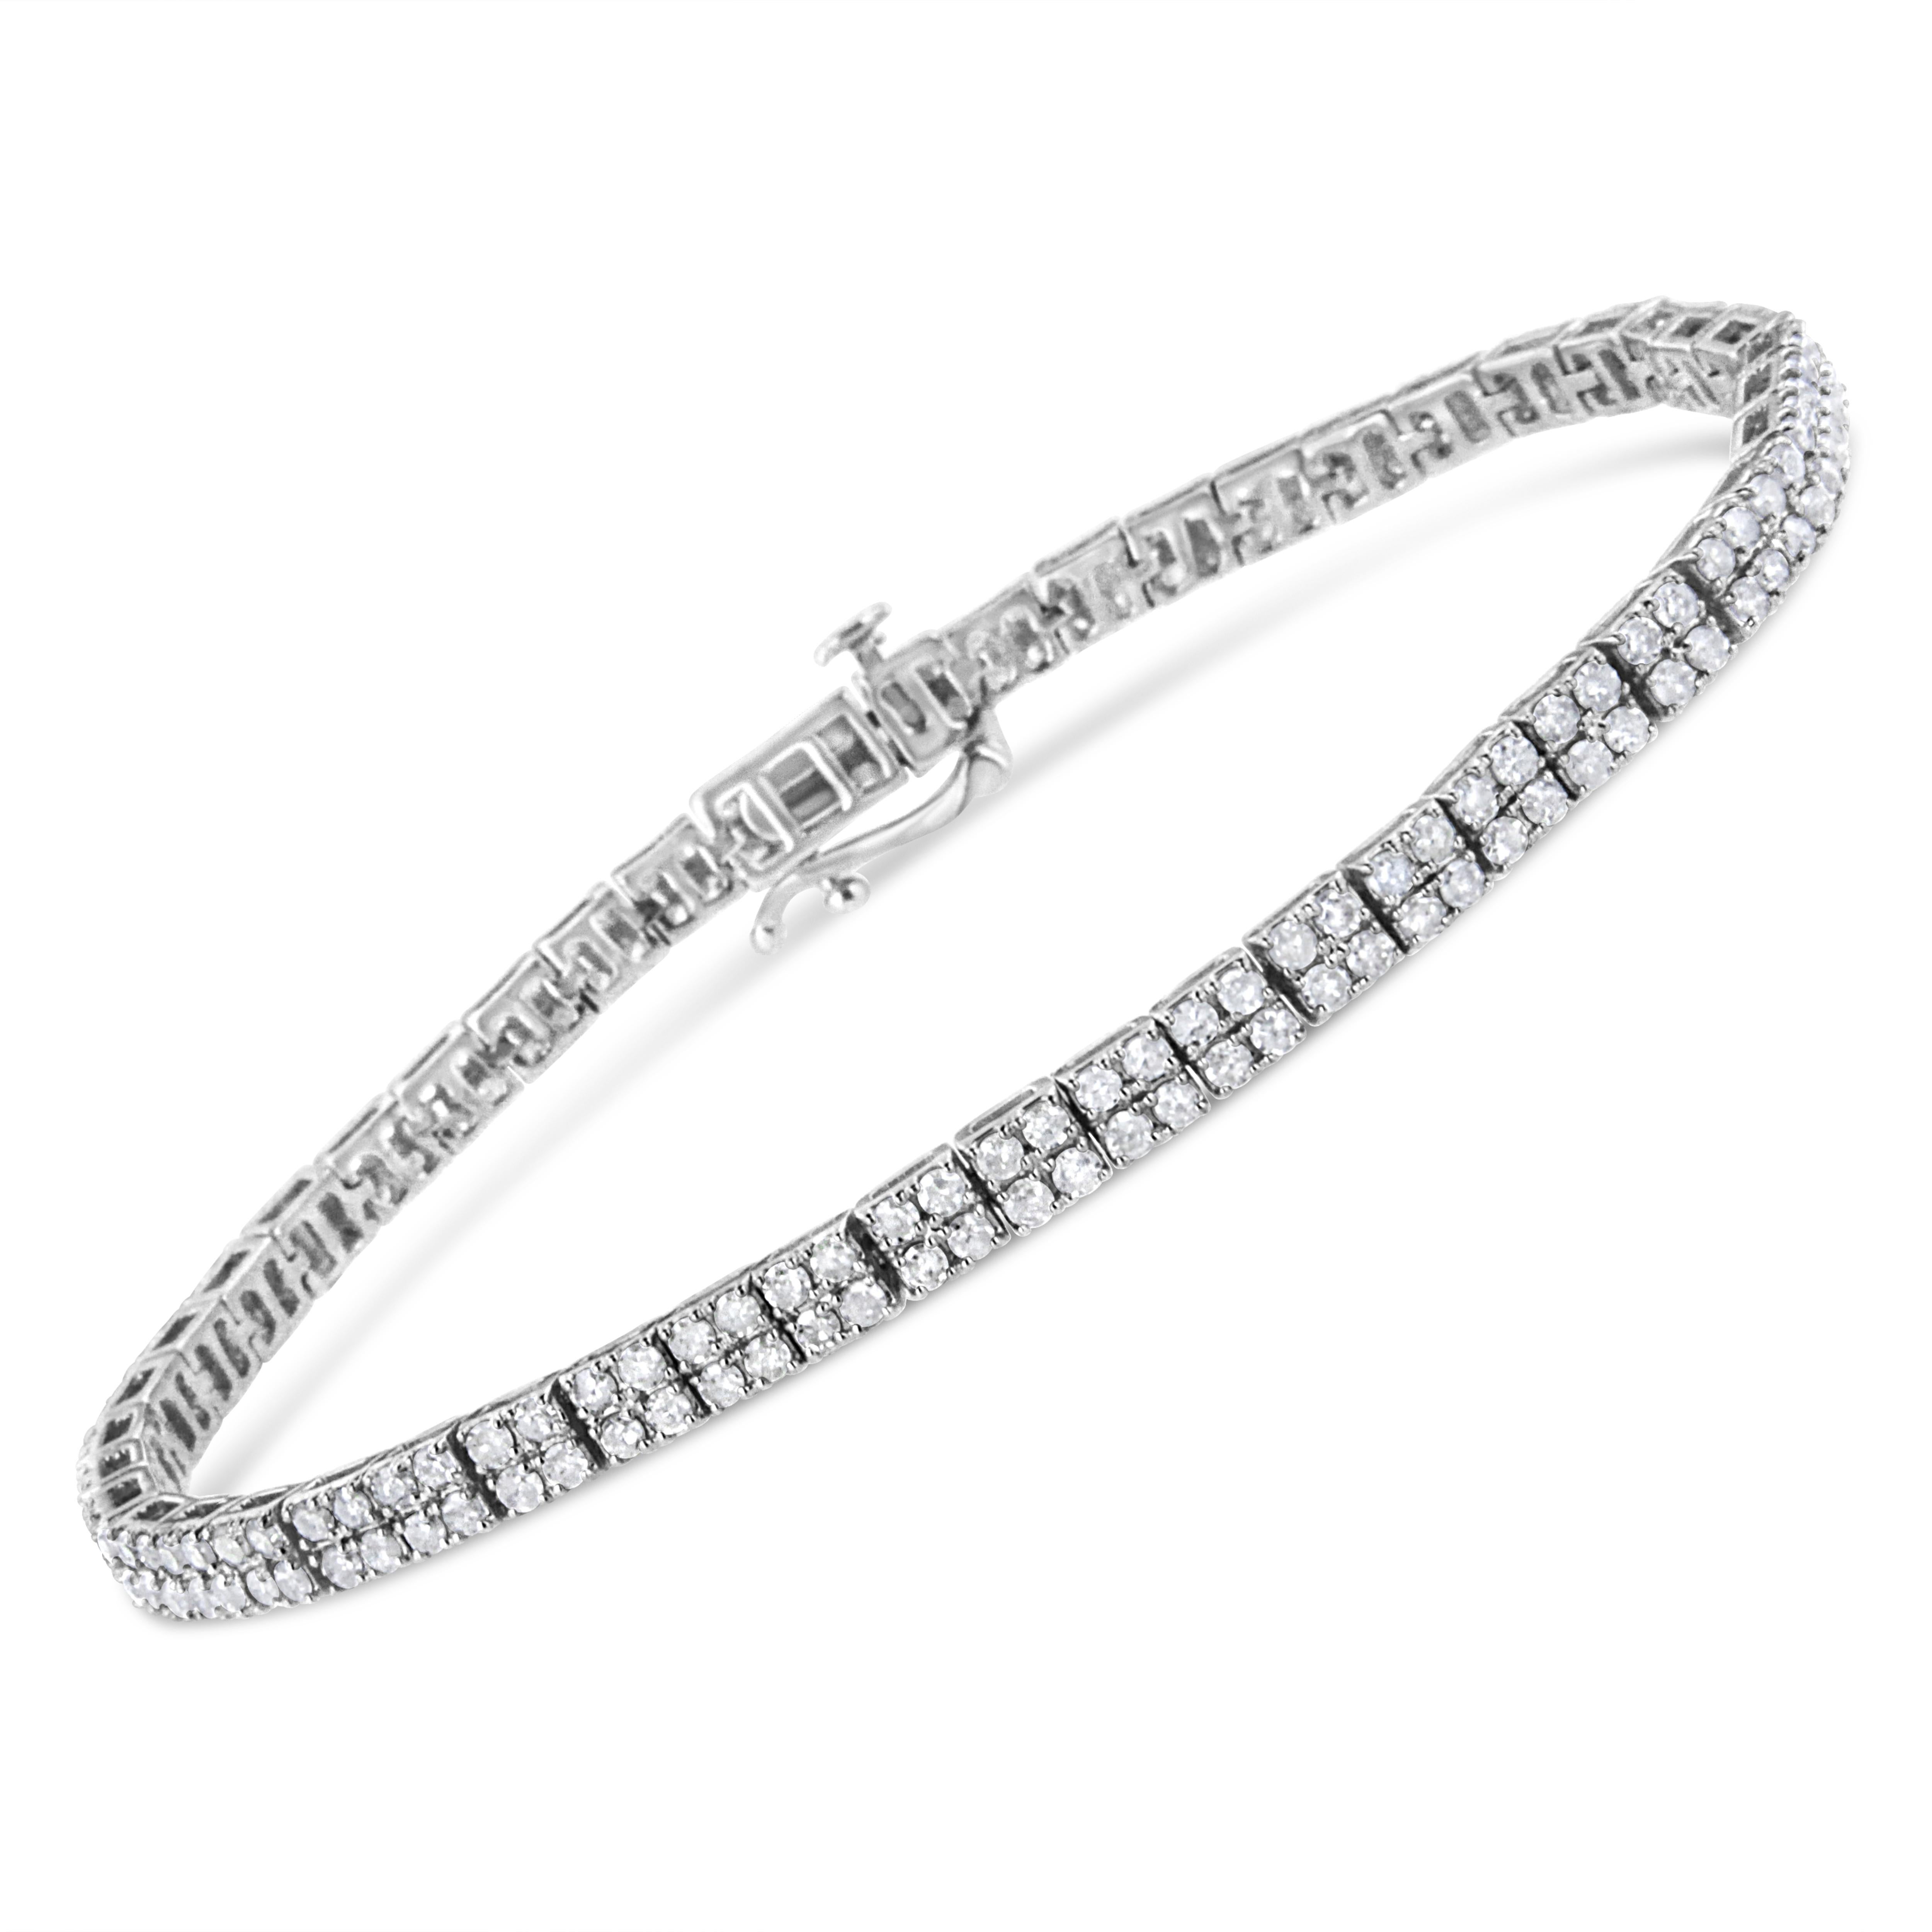 Modern yet timeless, this .925 sterling silver piece is a twist on the classic link bracelet. Silver square links of 4 round-cut diamonds each make up the design of this everlasting piece. The diamonds sit in a striking prong setting, and have a